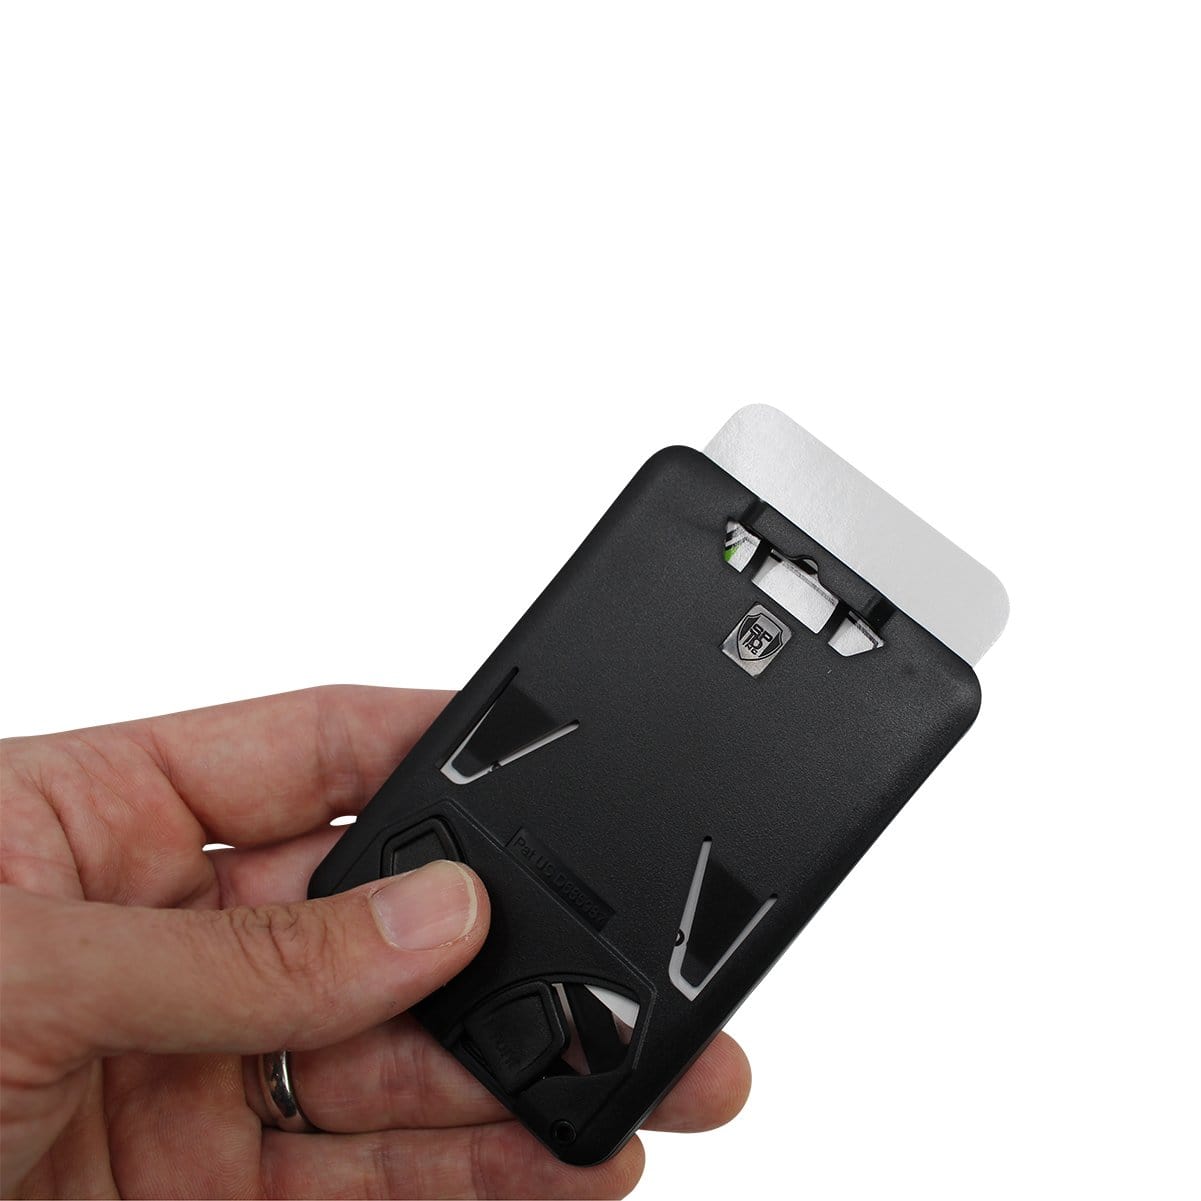 A hand holding a black, slim multi-tool device with a white card inserted into the Hard Plastic 3 Card Badge Holder with Badge Reel - Retractable ID Lanyard Features Belt Clip & Carabiner - Rigid Vertical CAC Holder - Top Load Holds Three Cards by SpecialistID.